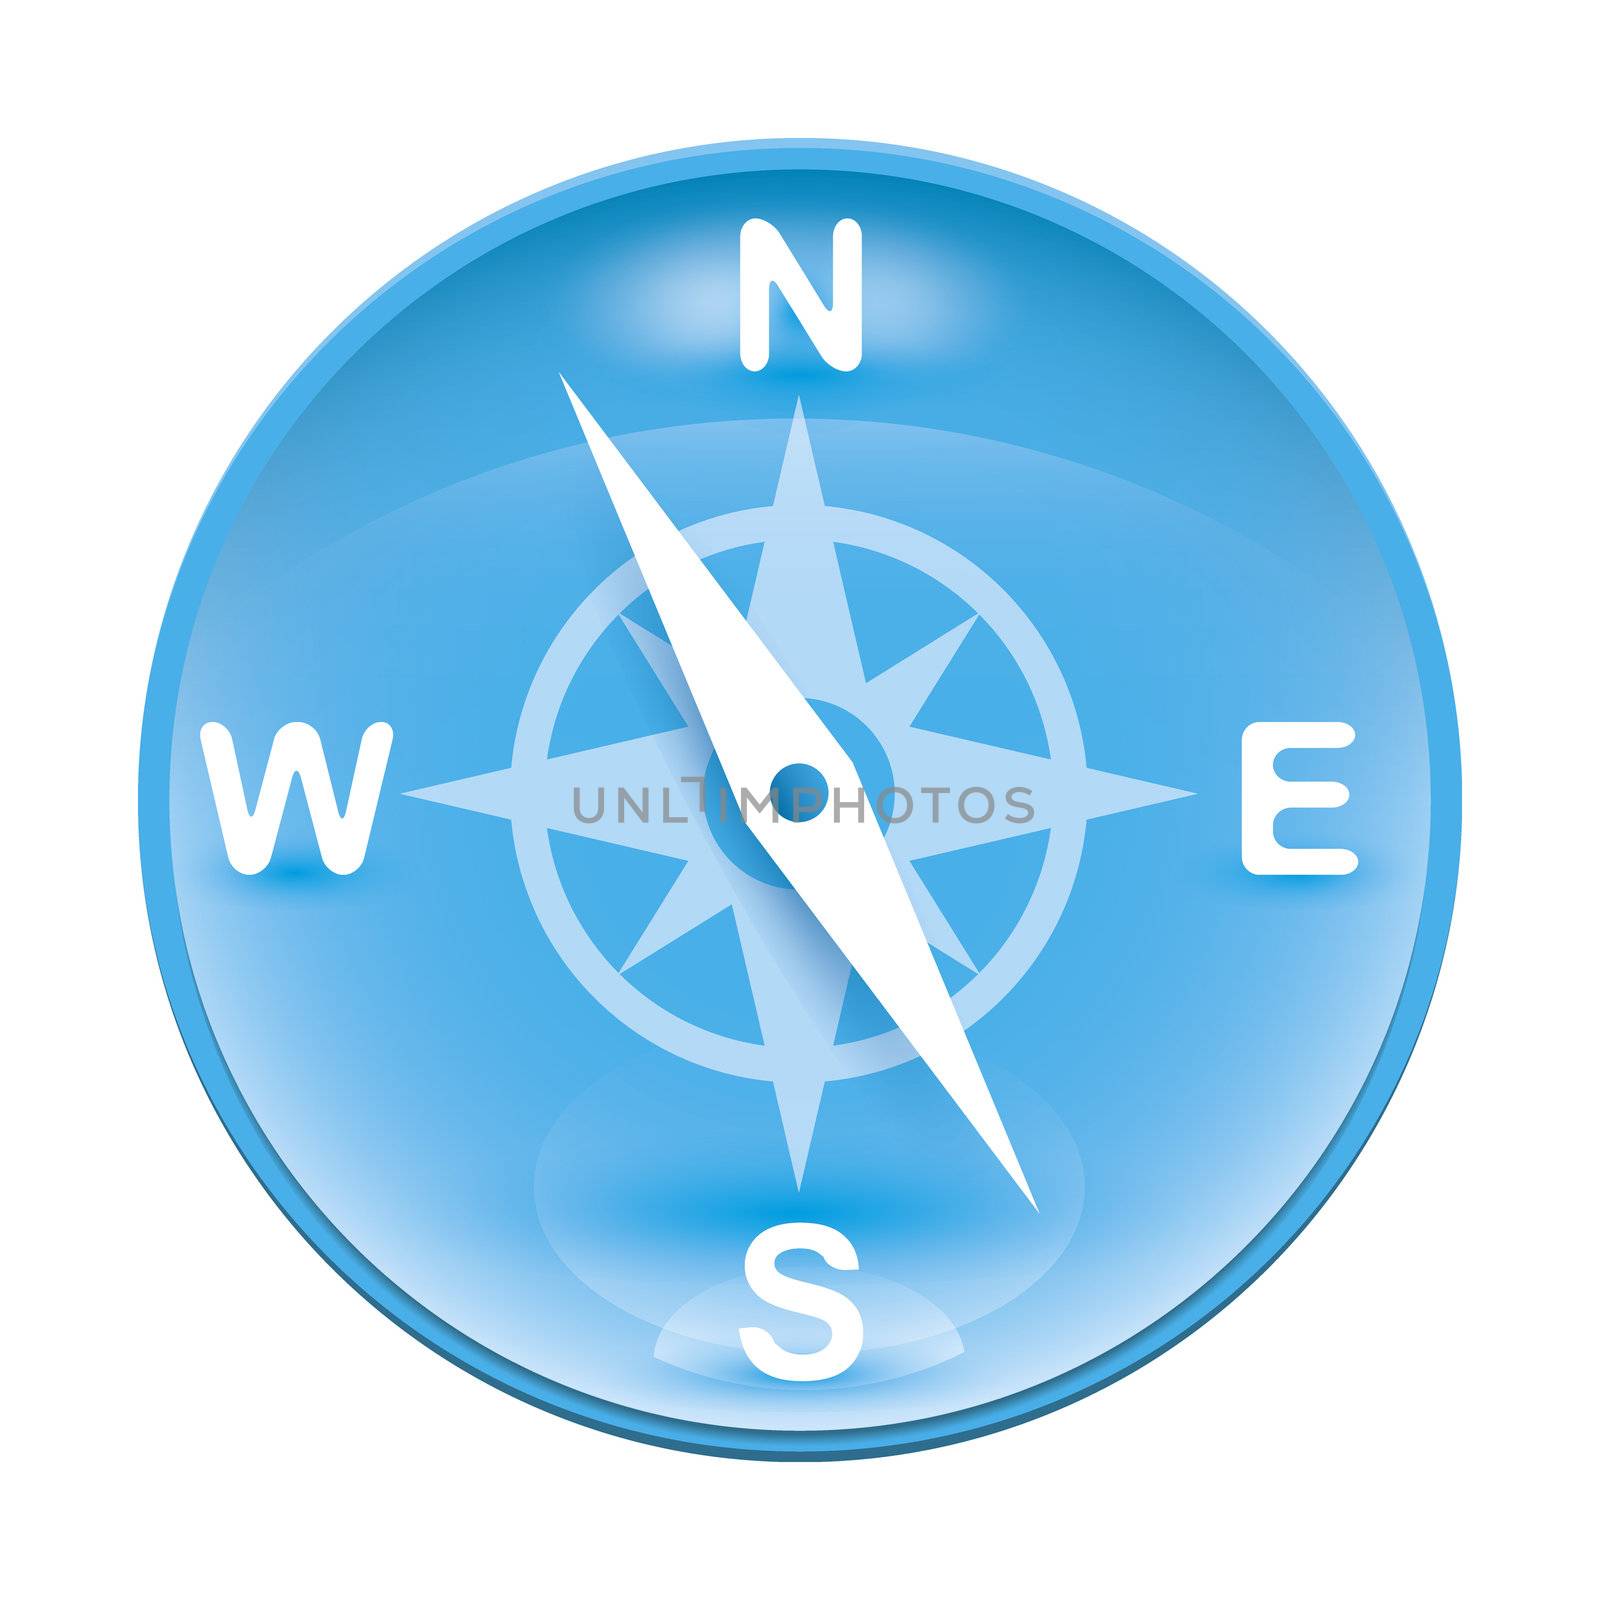 An image of a blue wind rose icon